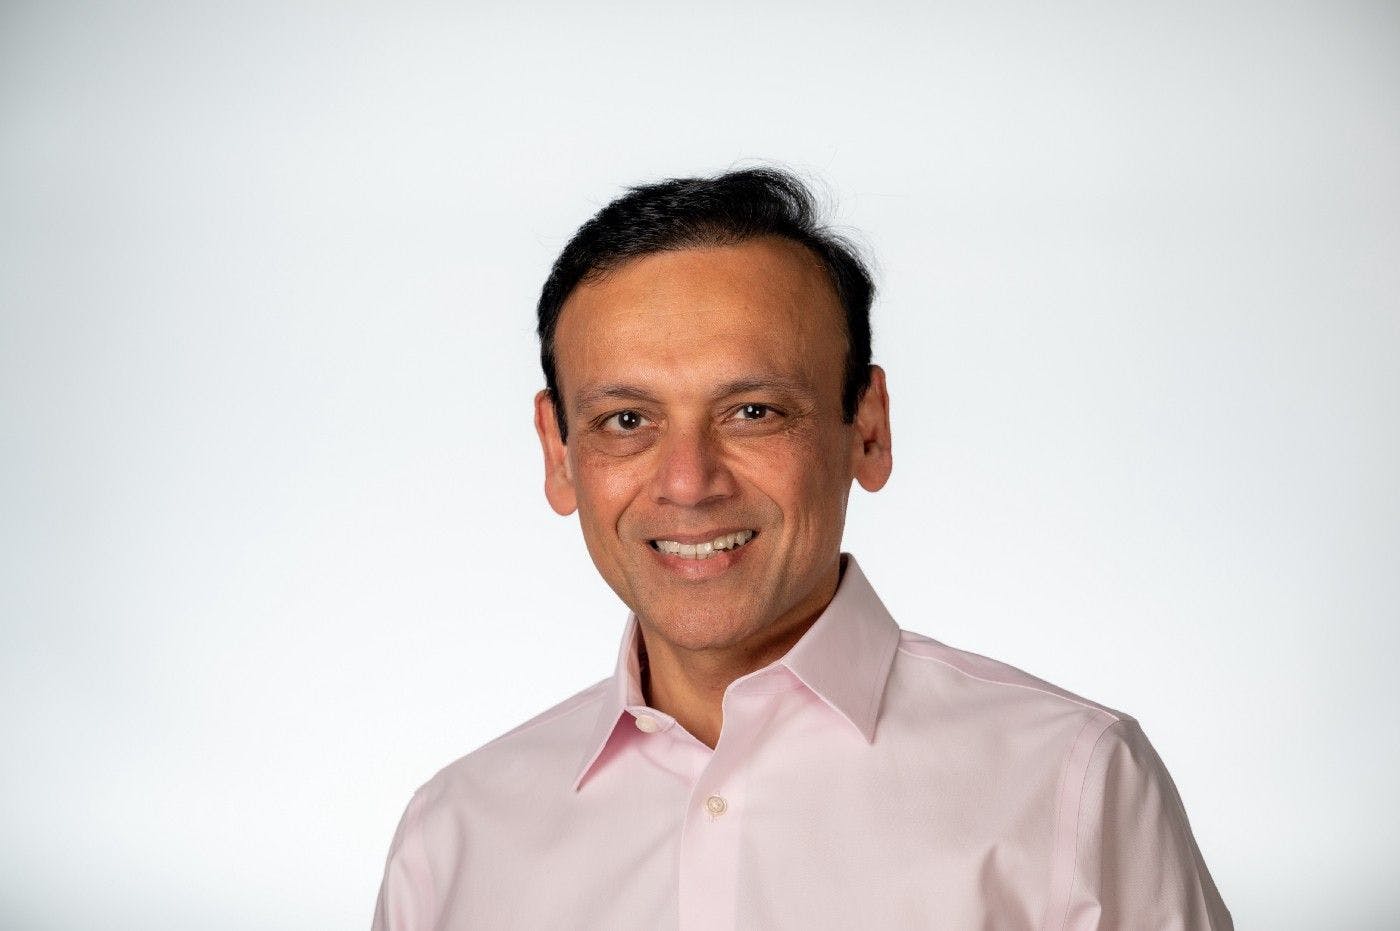 Sanjeev Agrawal of LeanTaaS says efficiency is a 'requirement' for hospitals | Data Book podcast